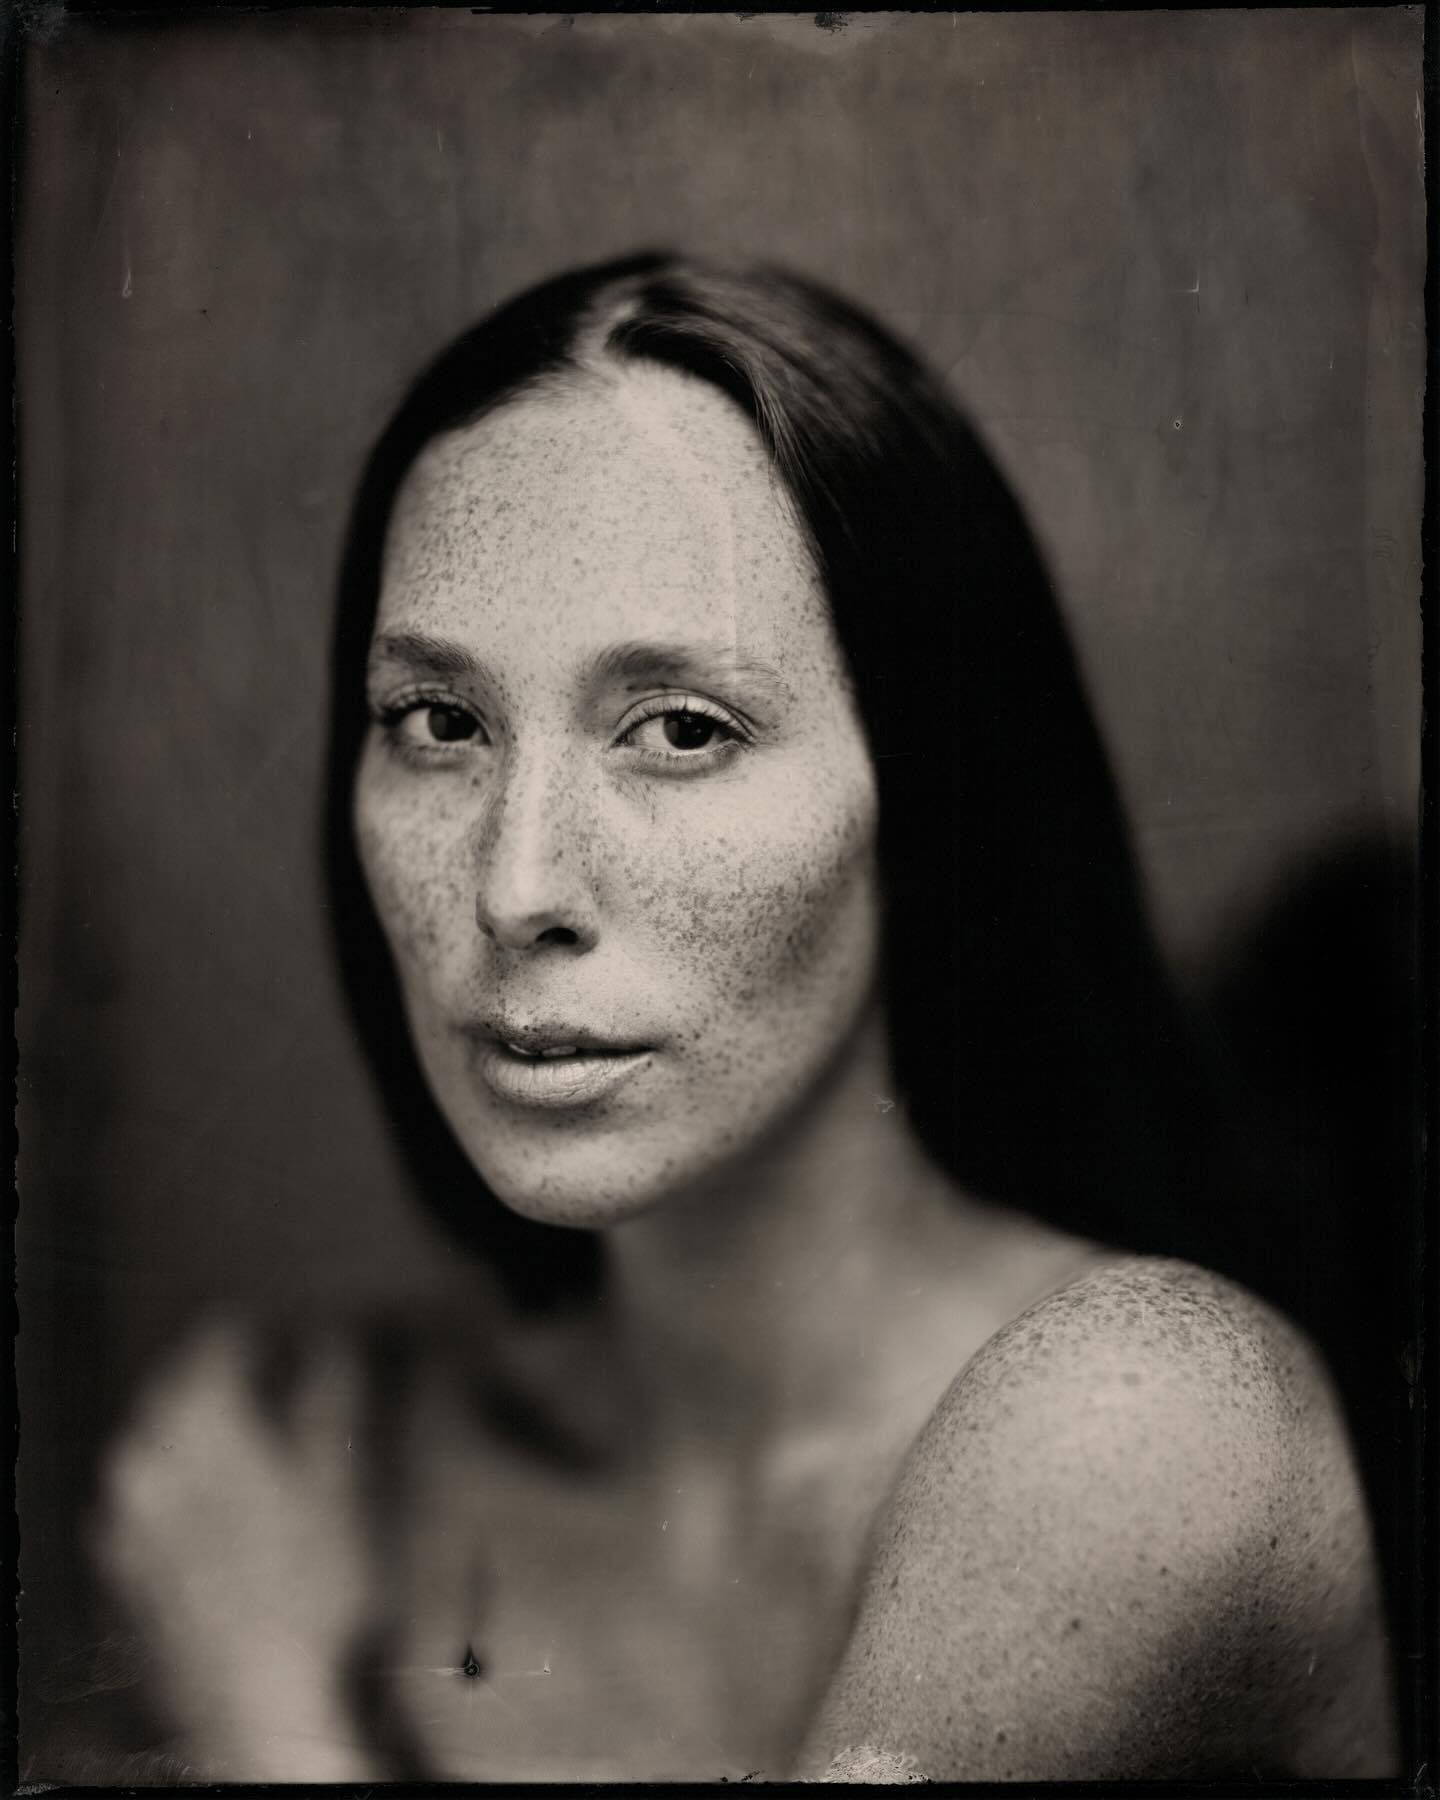 Wet plates are just so striking ~~~ this was the last stop on my east coast tour with @gregshea_artificer in CT 💓